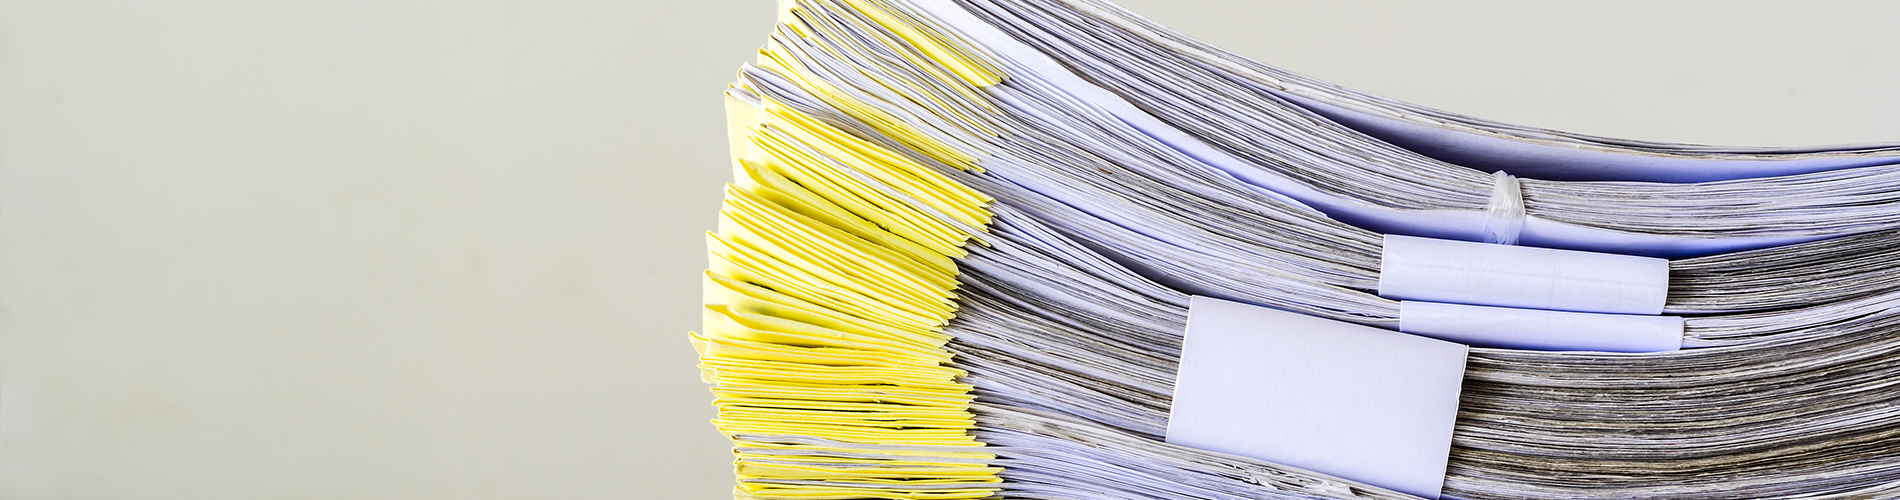 Documents piled up